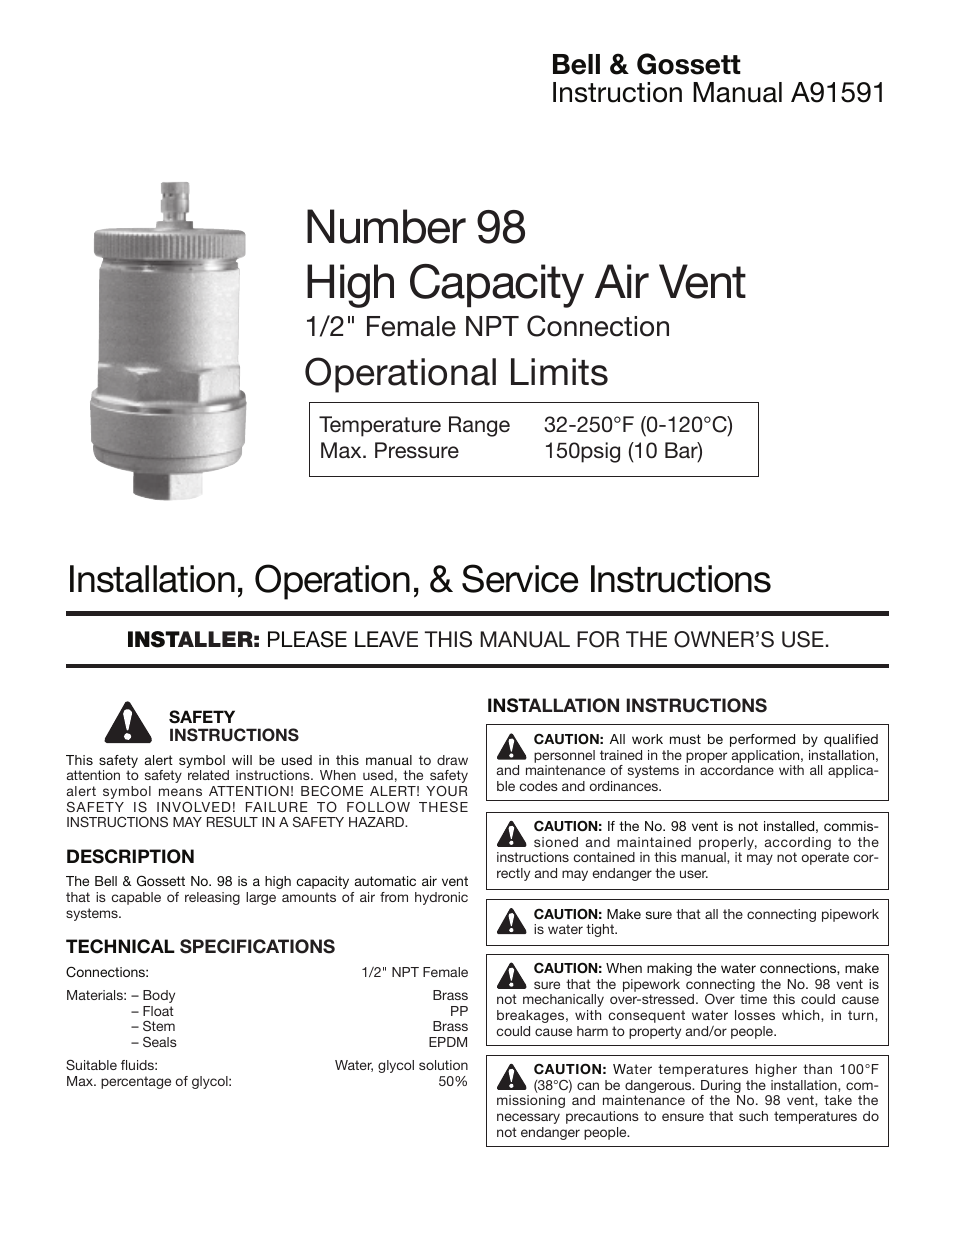 A91591 Number 98 High Capacity Air Vent 1/2″ Female NPT Connection Operational Limits